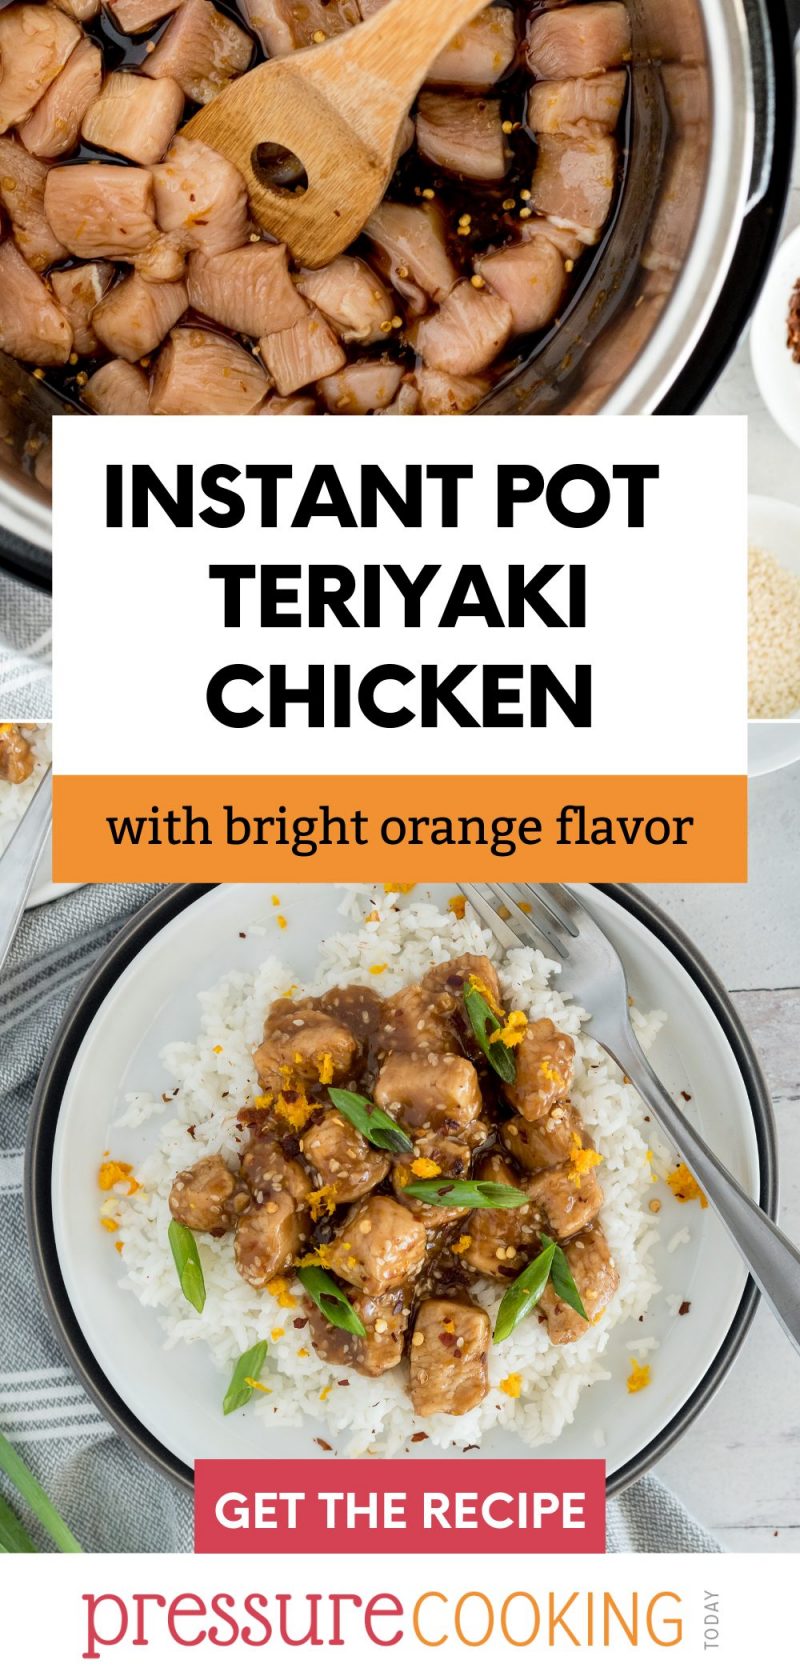 pinterest button for INstant Pot teriyaki chicken, with two images: a top-down shot into an Instant Pot filled with diced chicken and sauce, and an overhead shot of the finished dish, served on a bed of rice and garnished with green onions